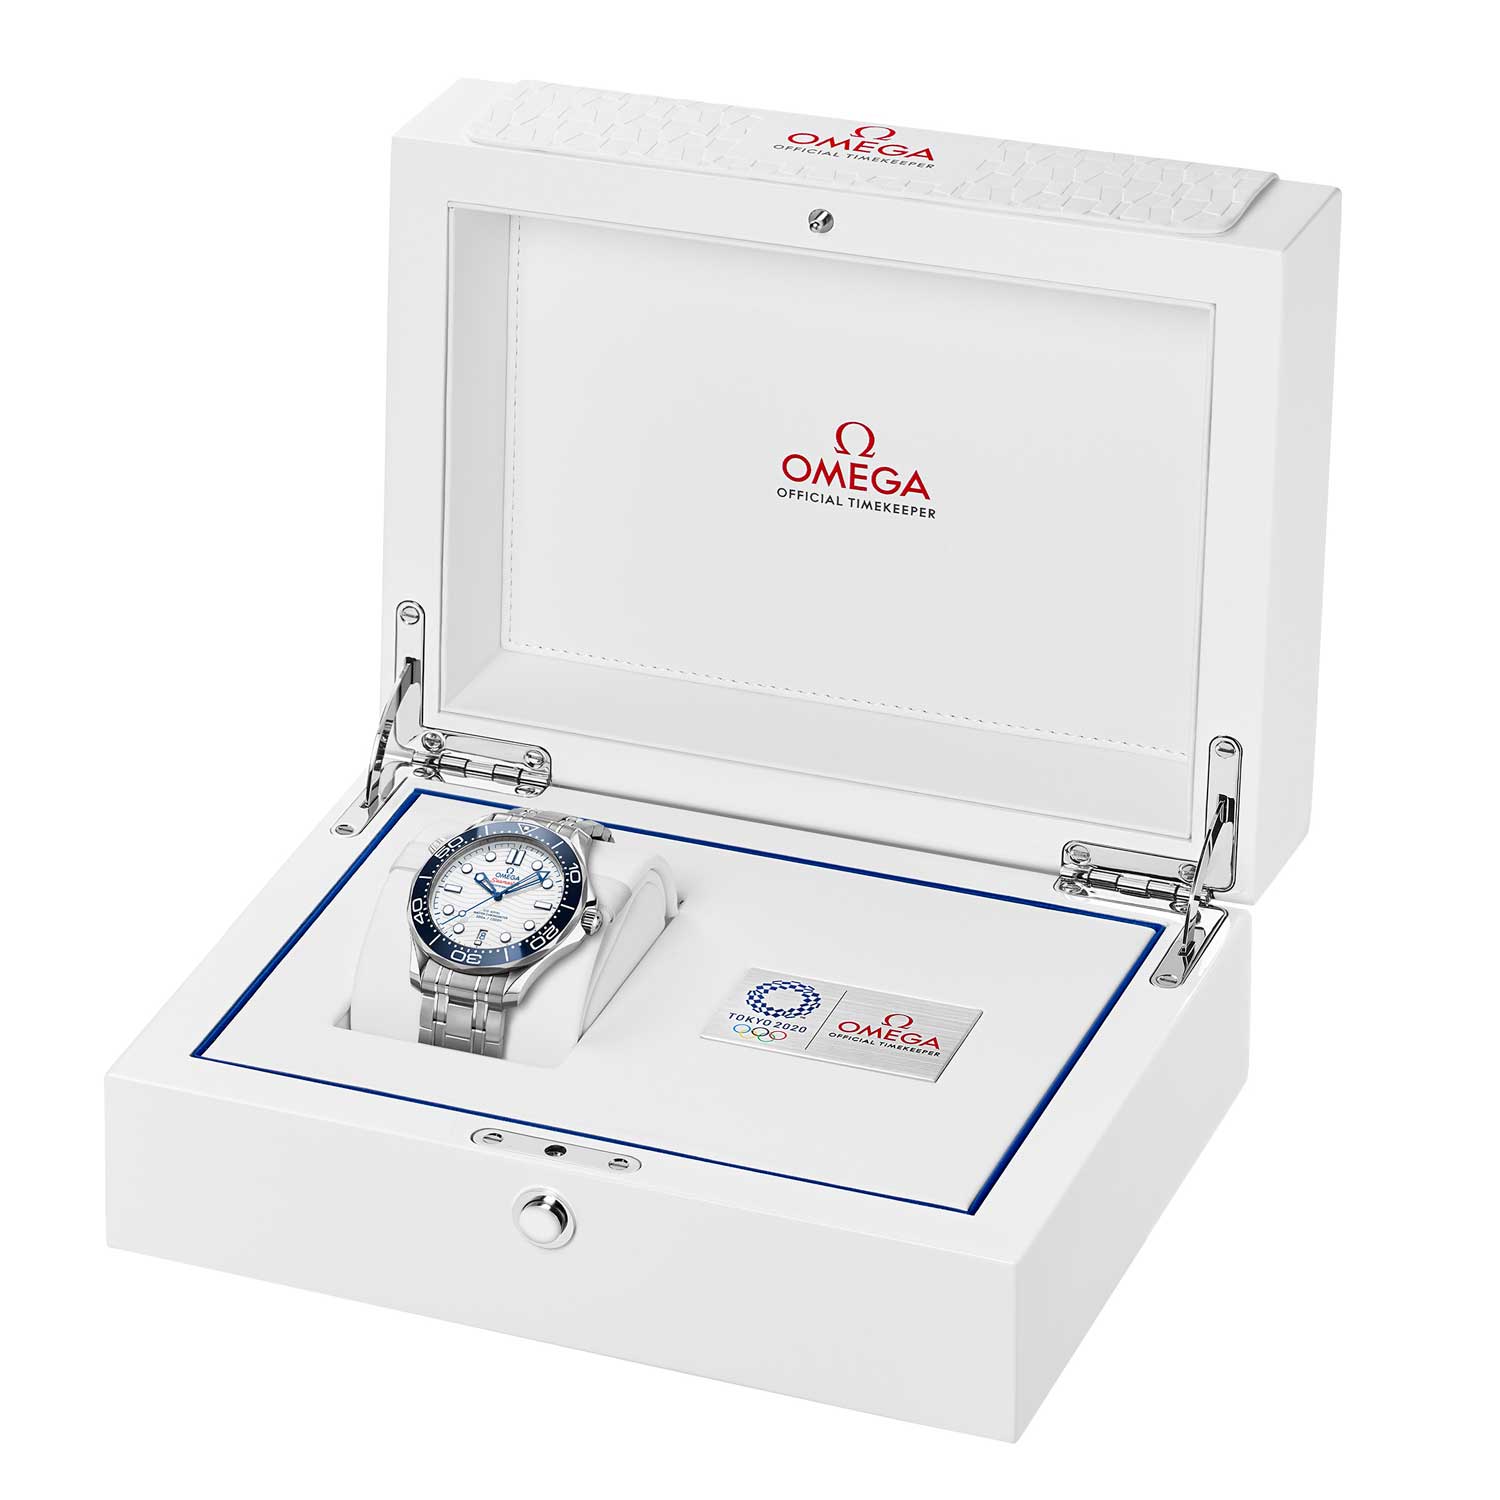 The watch comes inside a special Olympic Games presentation box, along with a Master Chronometer card and a 5-year warranty.